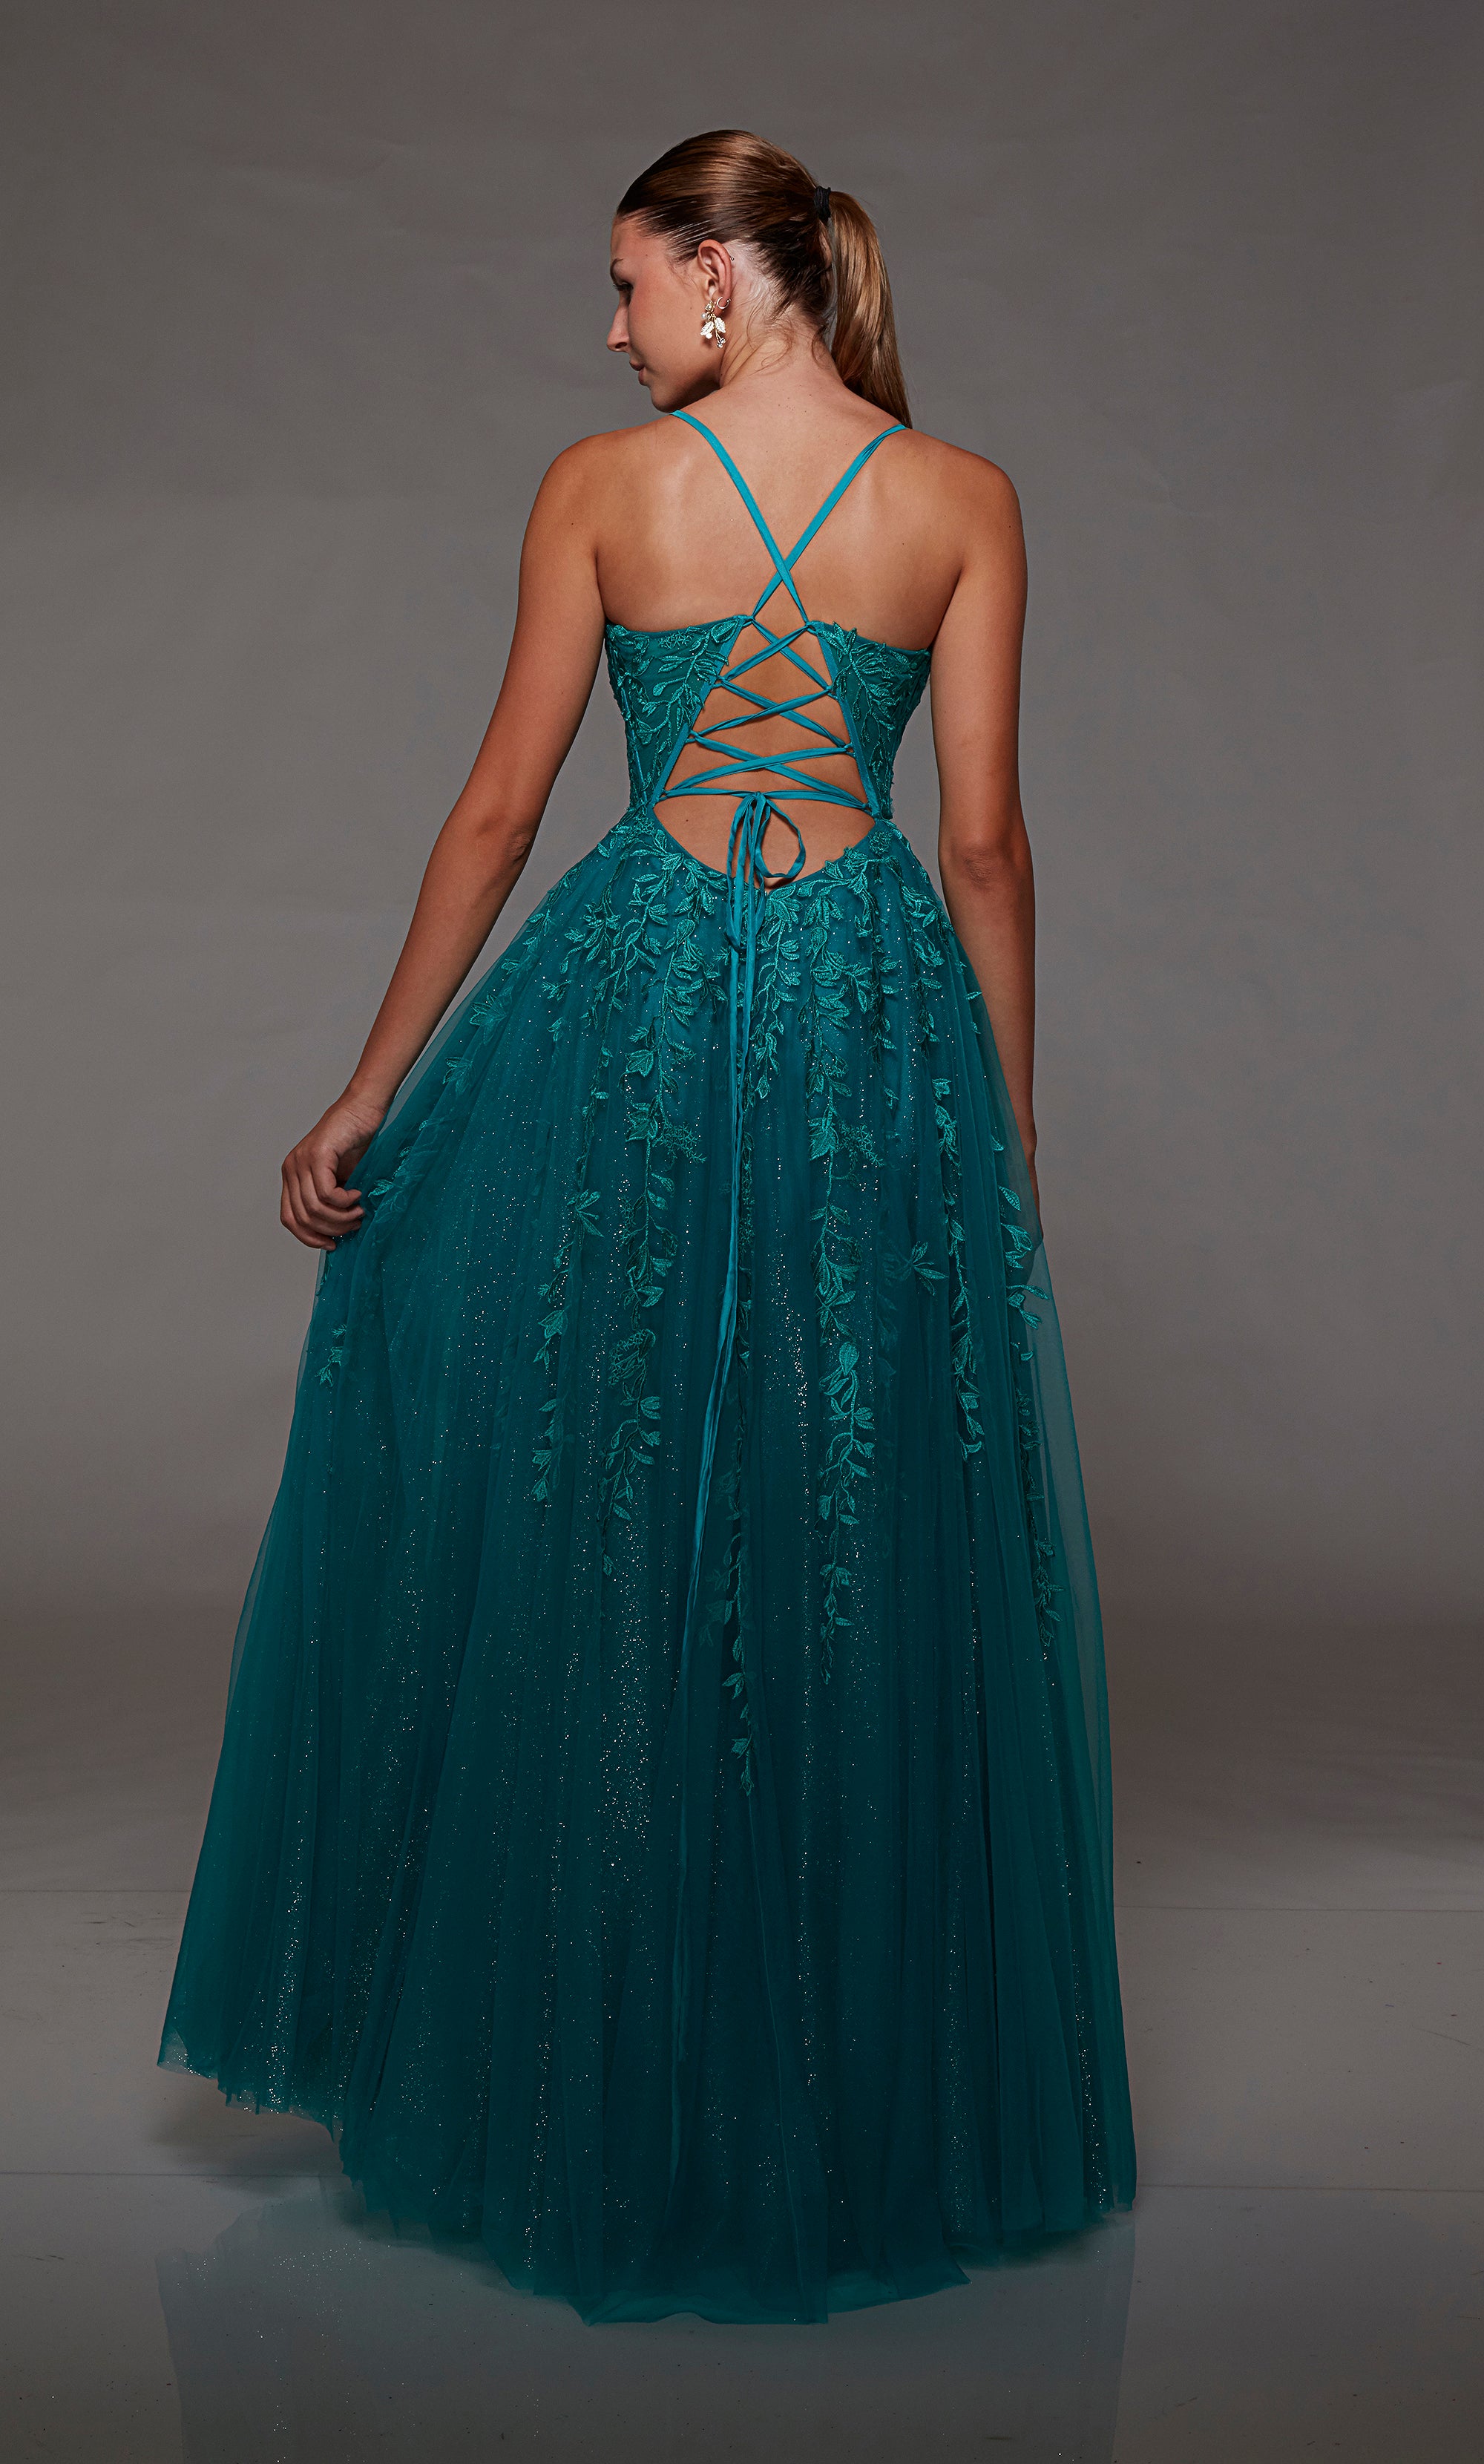 Lapis blue square neck ball gown prom dress: Glitter tulle, corset bodice, adorned with floral lace appliques, and an captivating strappy lace-up back.